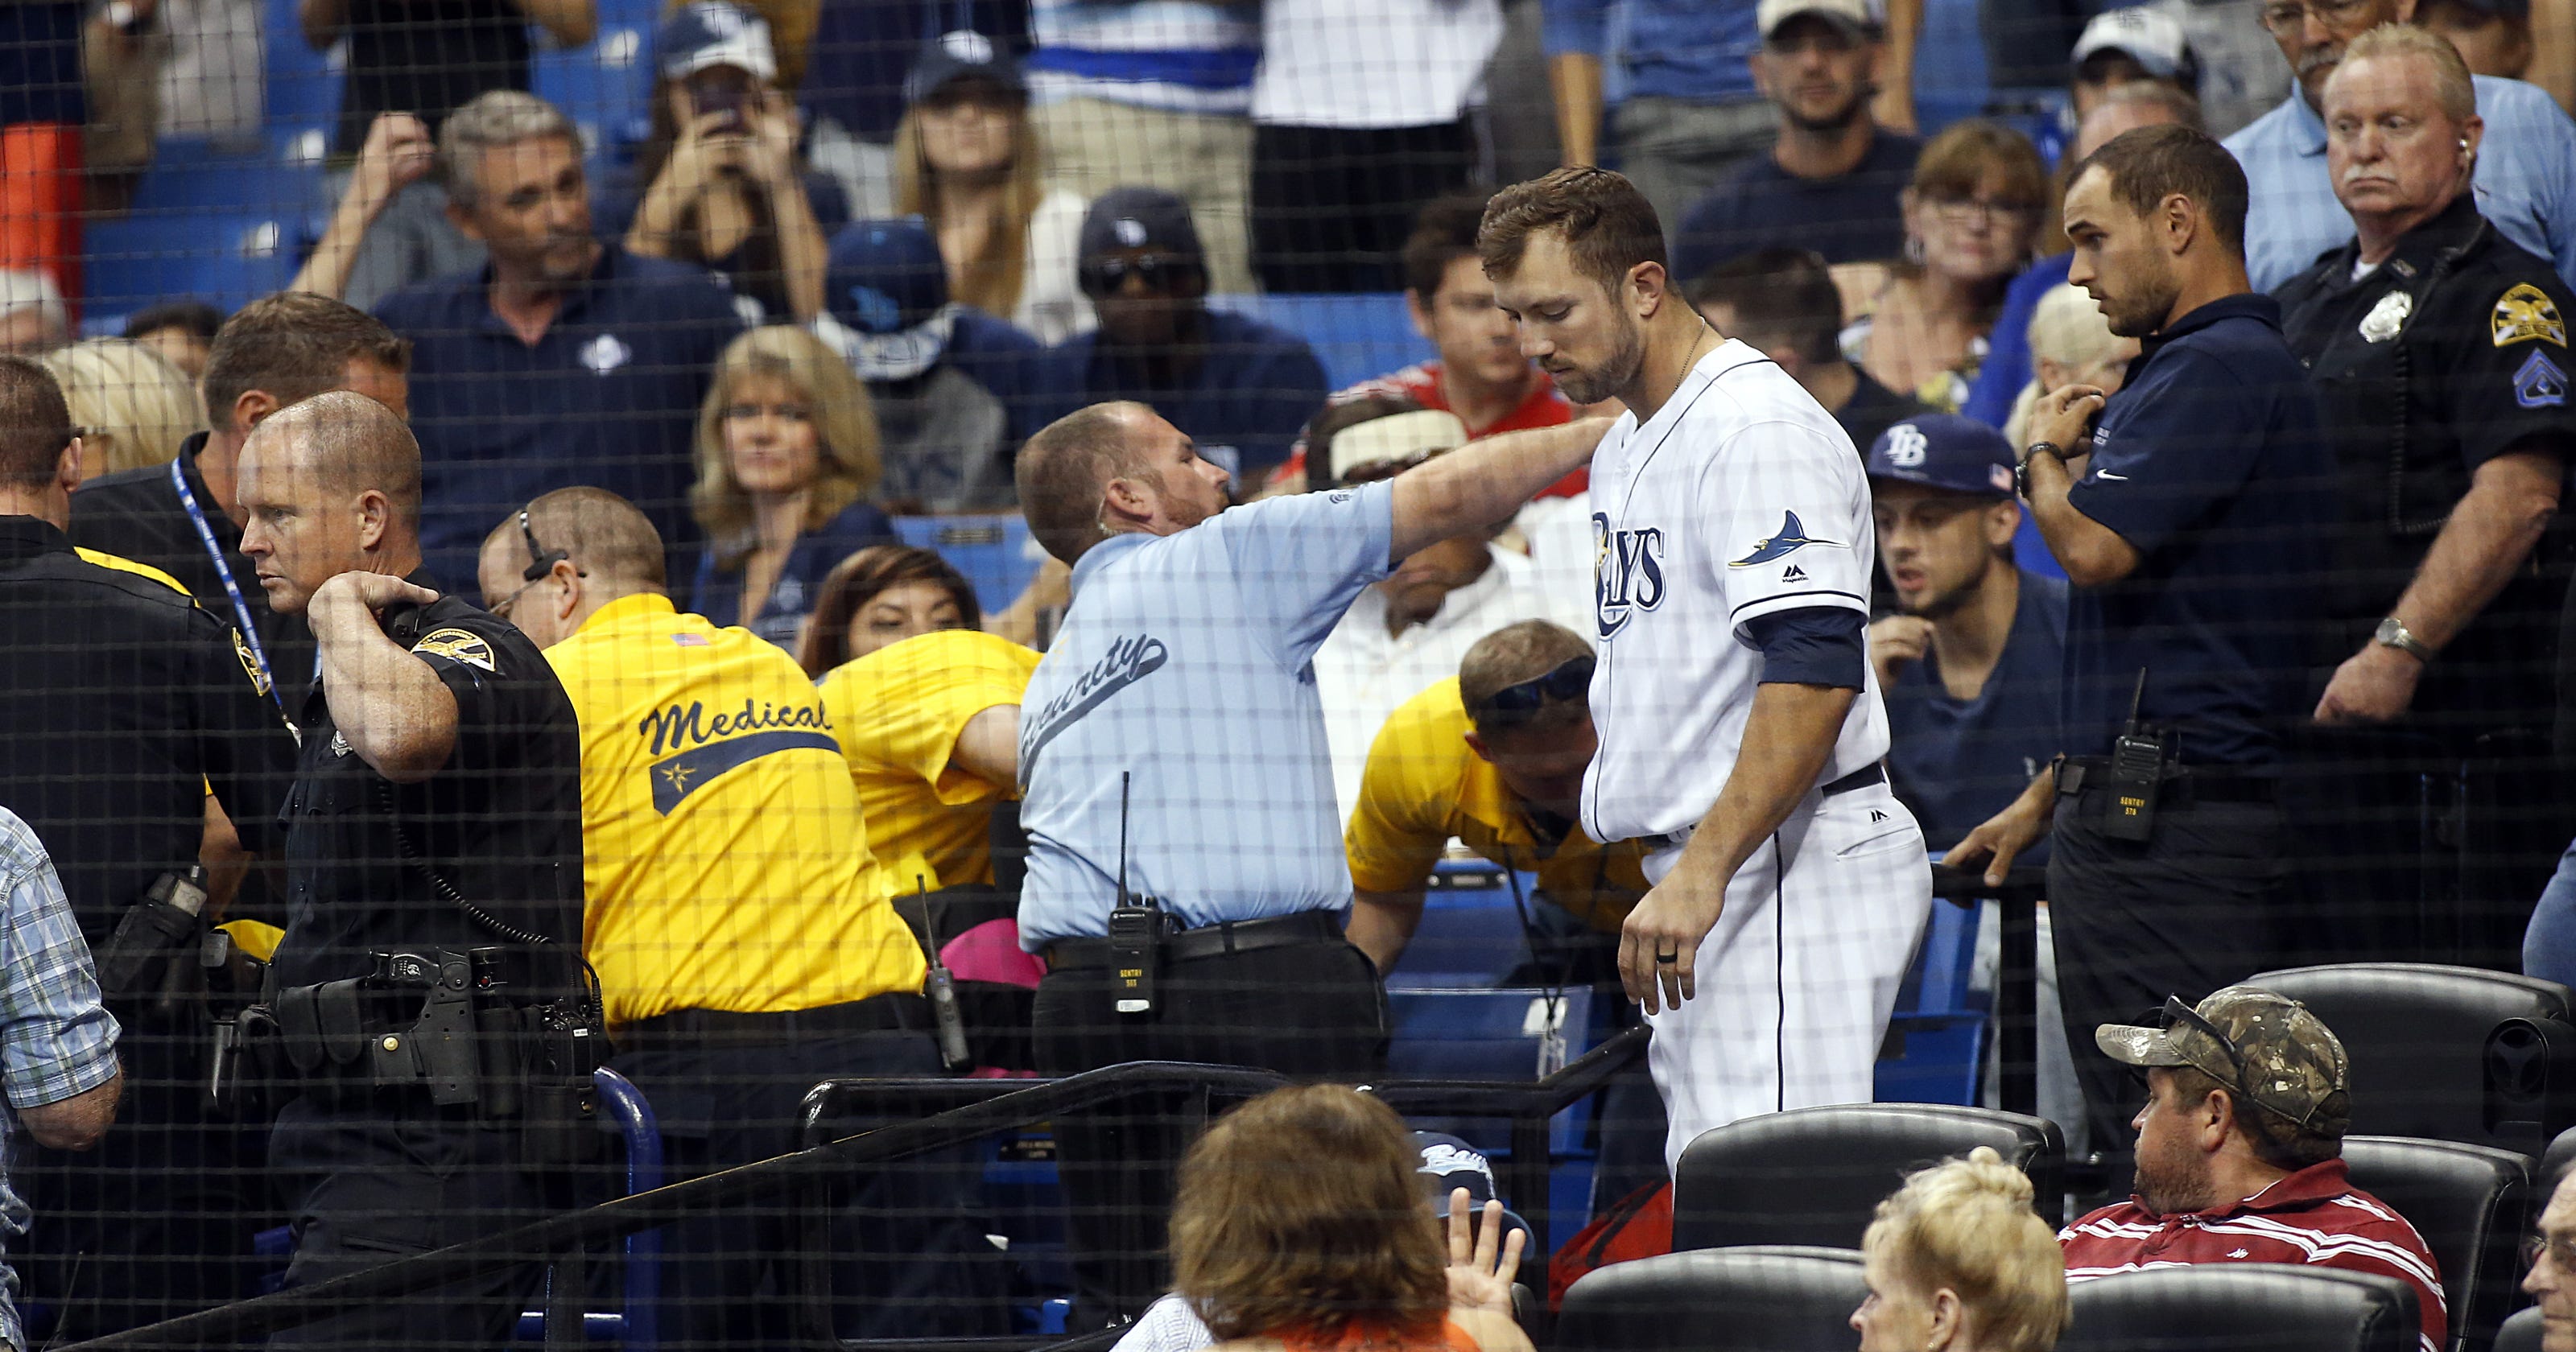 Baseball Fan Hit By Foul Ball Taken Off On Stretcher At Rays Game